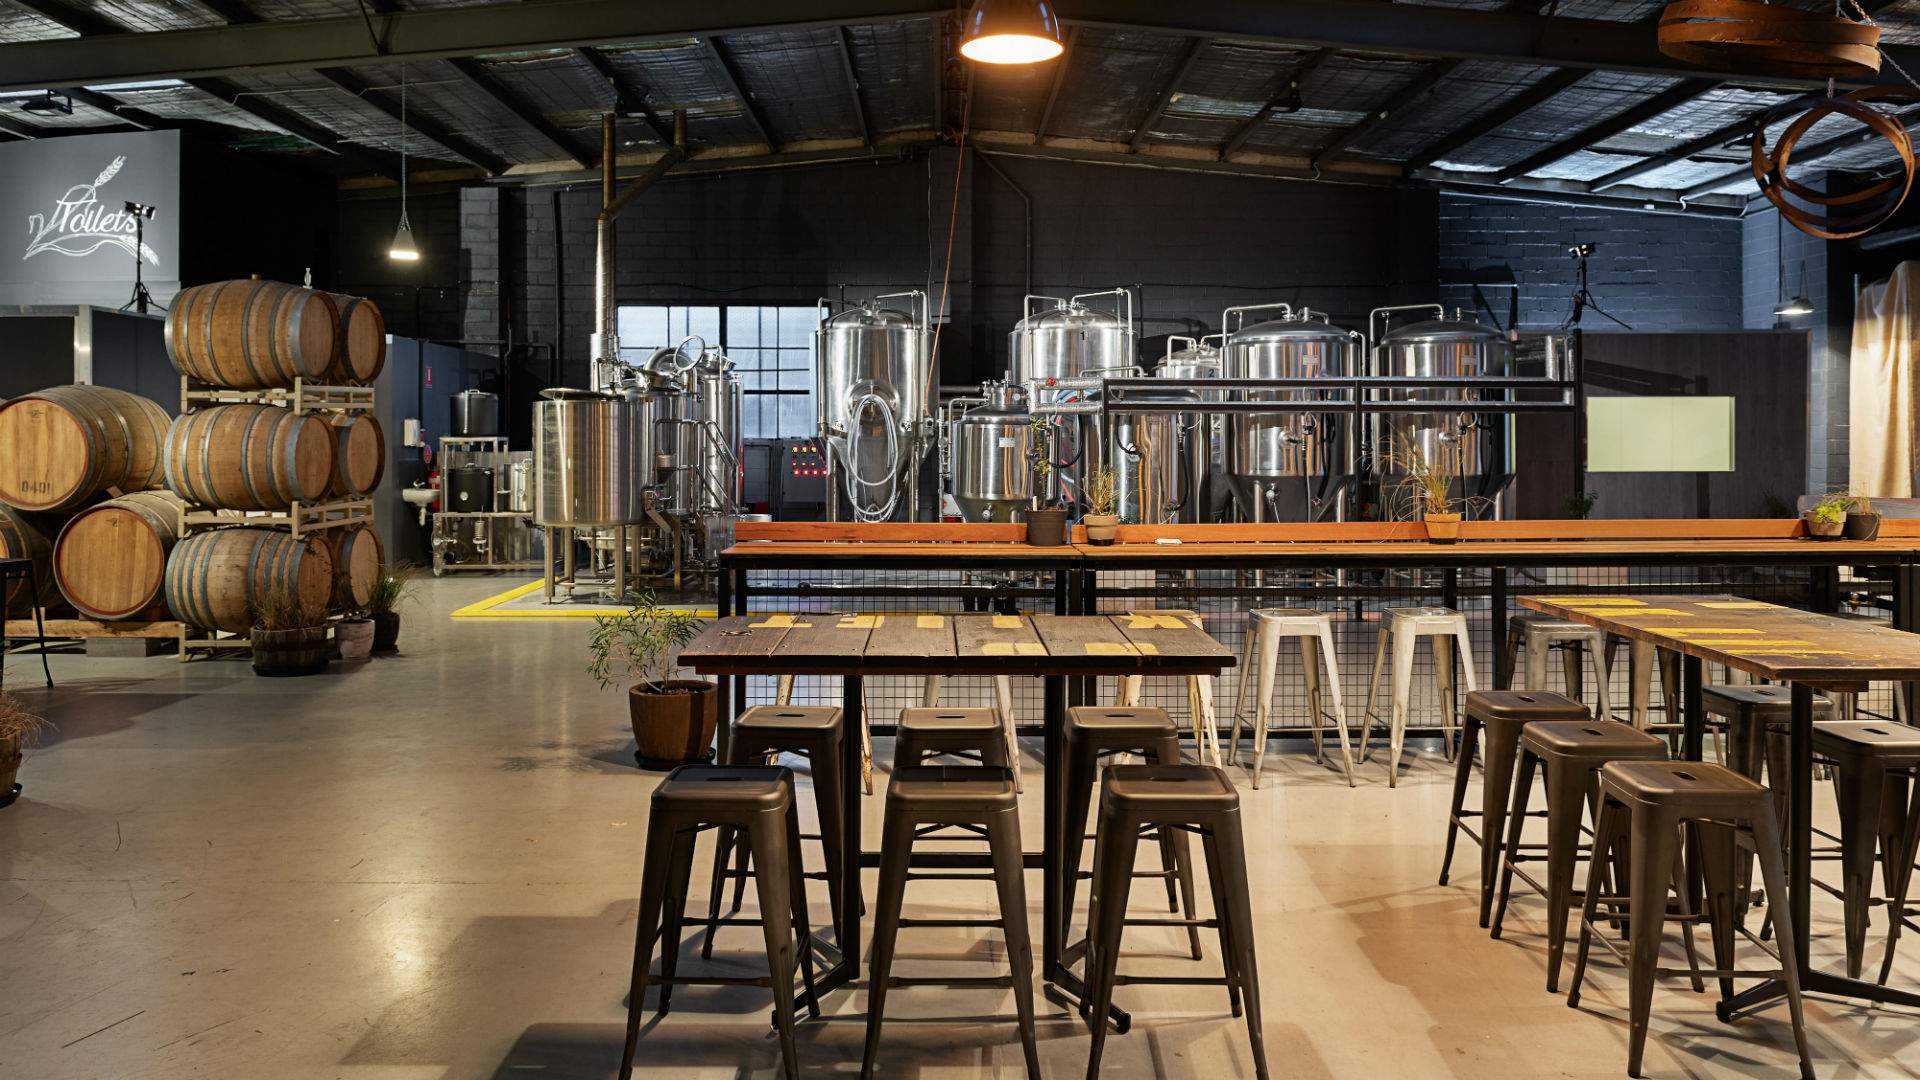 Future Mountain Is Melbourne's New Brewery and Taproom with a Focus on Funky Wild Ales